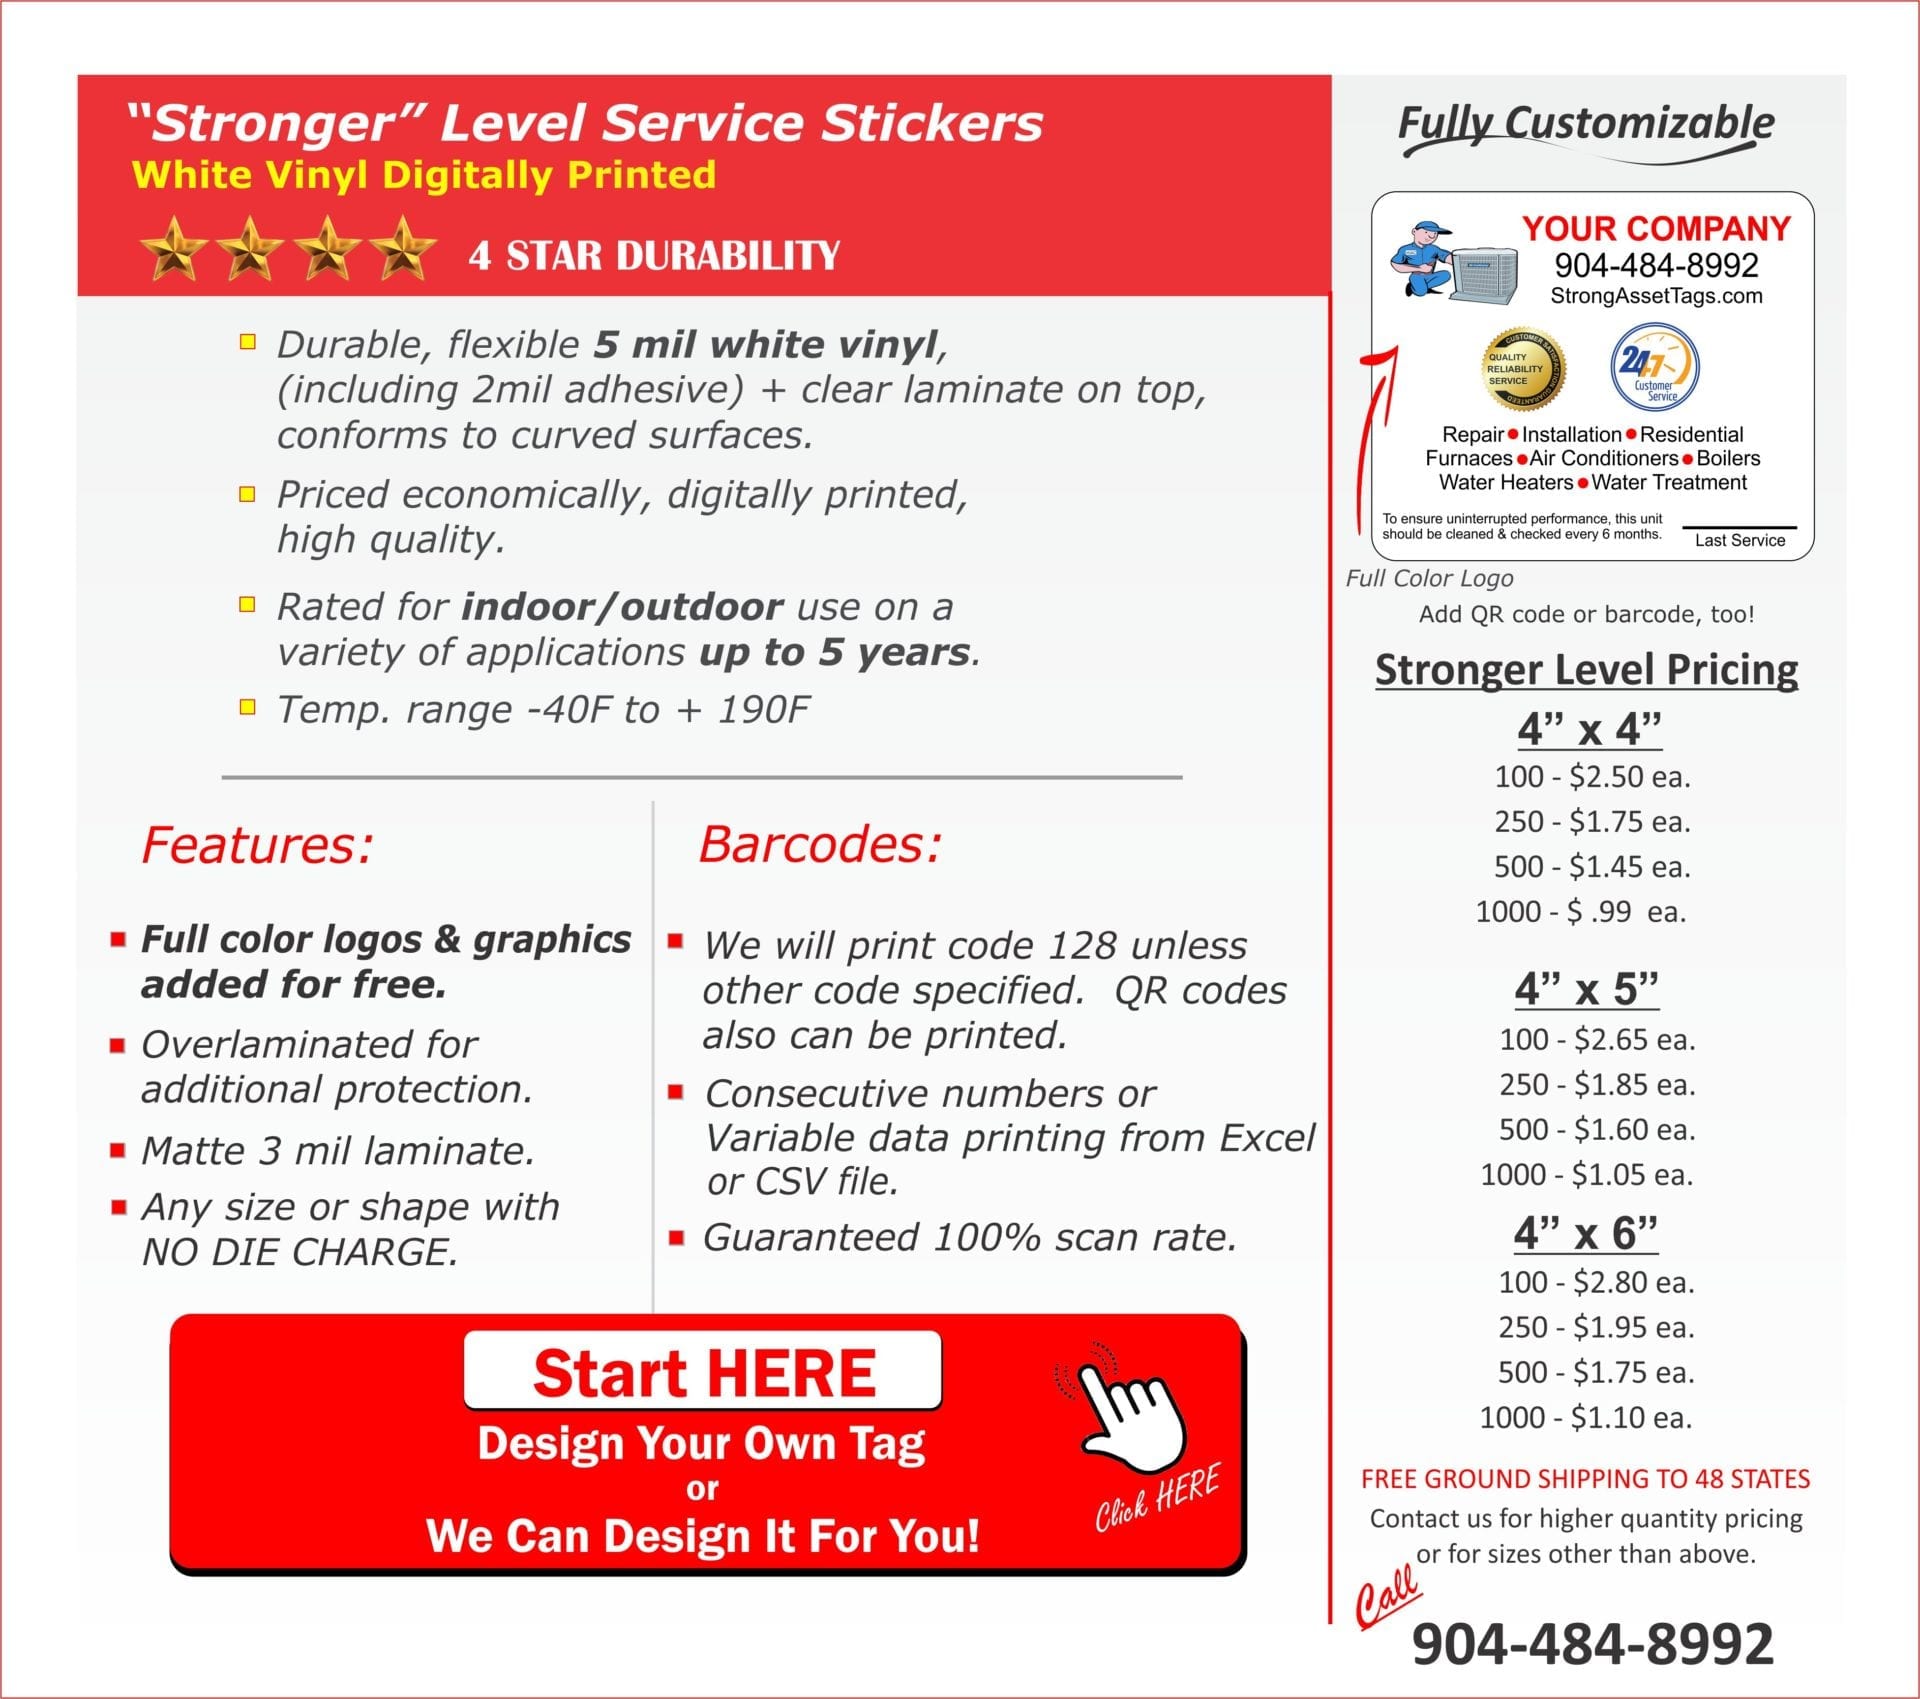 Details about our Serial Number Stickers